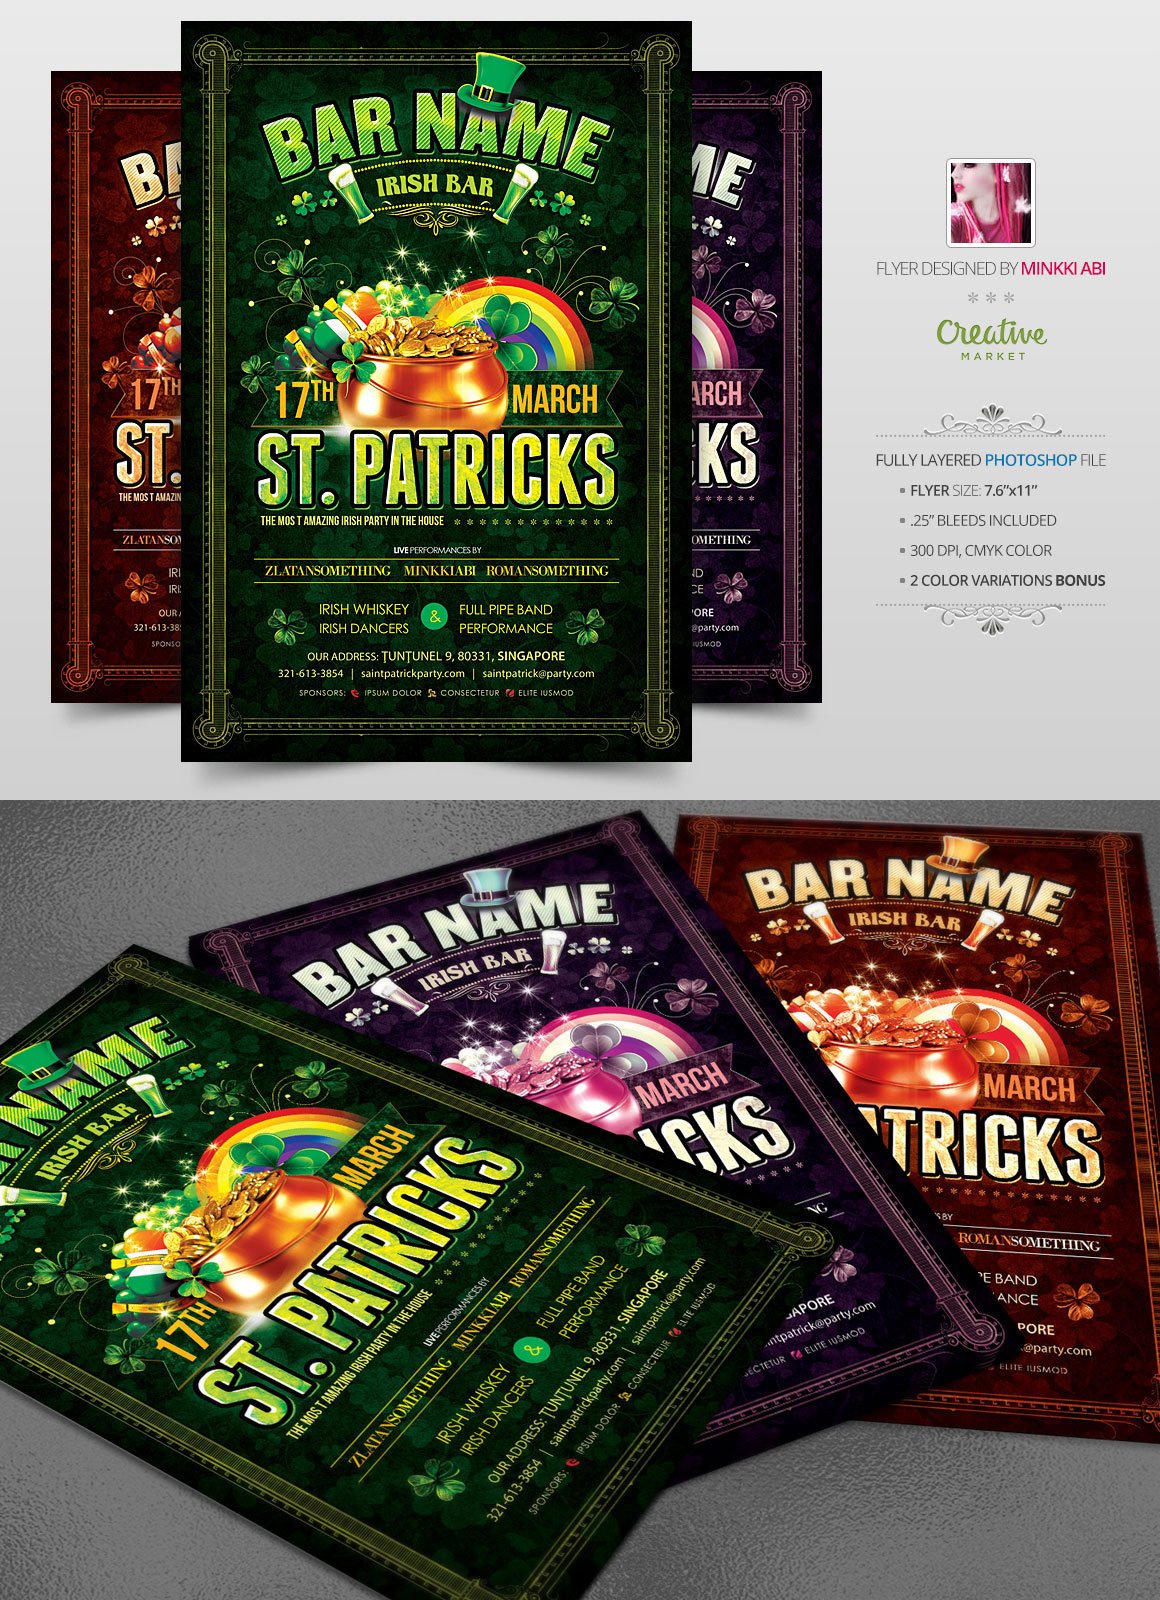 saint patrick's flyer Clover Leaves Patrick day poster money pot coins rainbow irish flag heart green balloons hat beer glass horse shoe grunge Holiday Festival